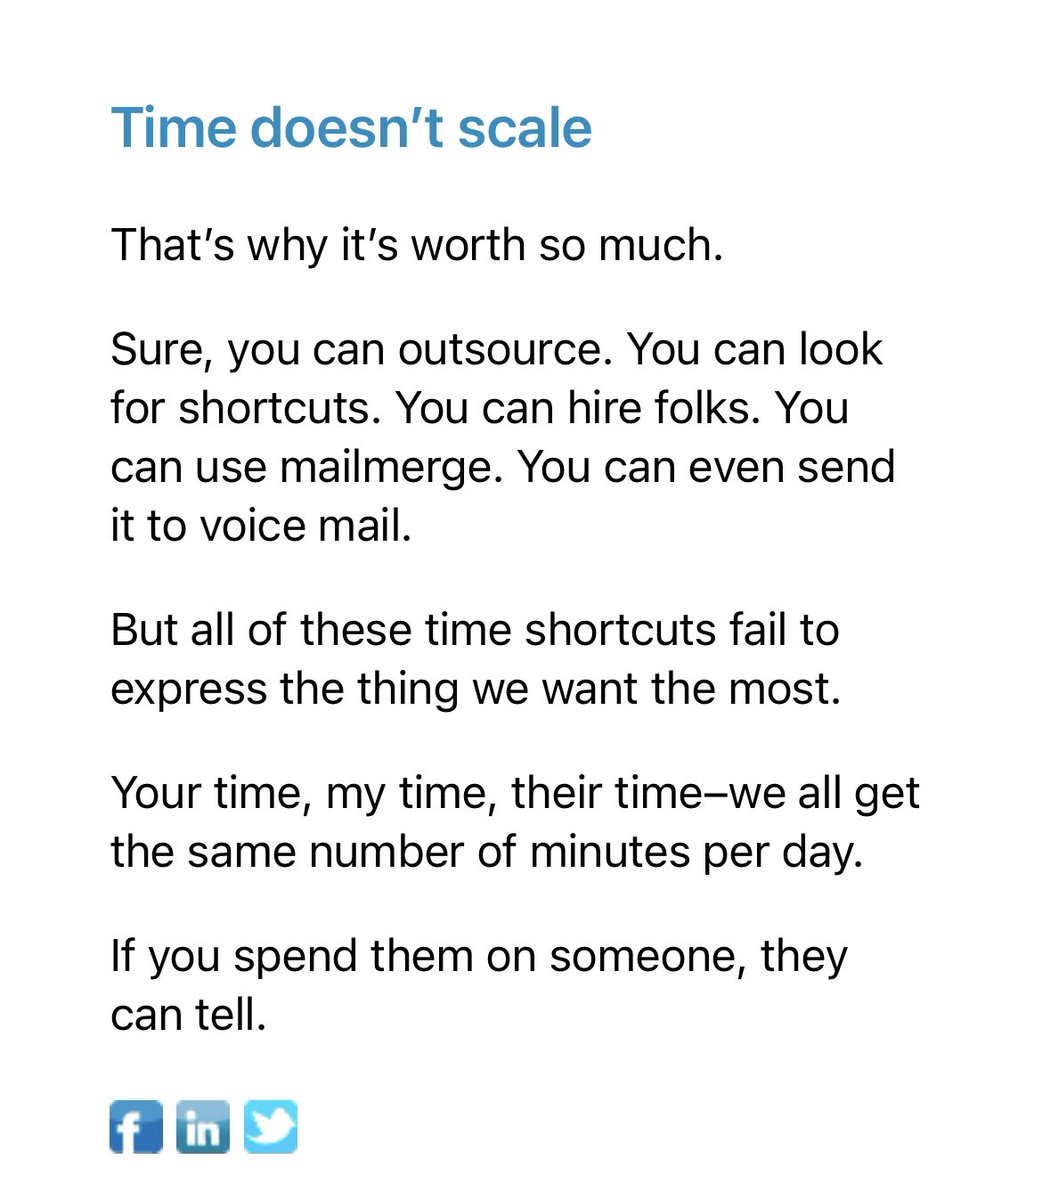 The yearly reminder for everyone in #legal from @ThisIsSethsBlog - even in 2022 time will not scale -  #changelegal